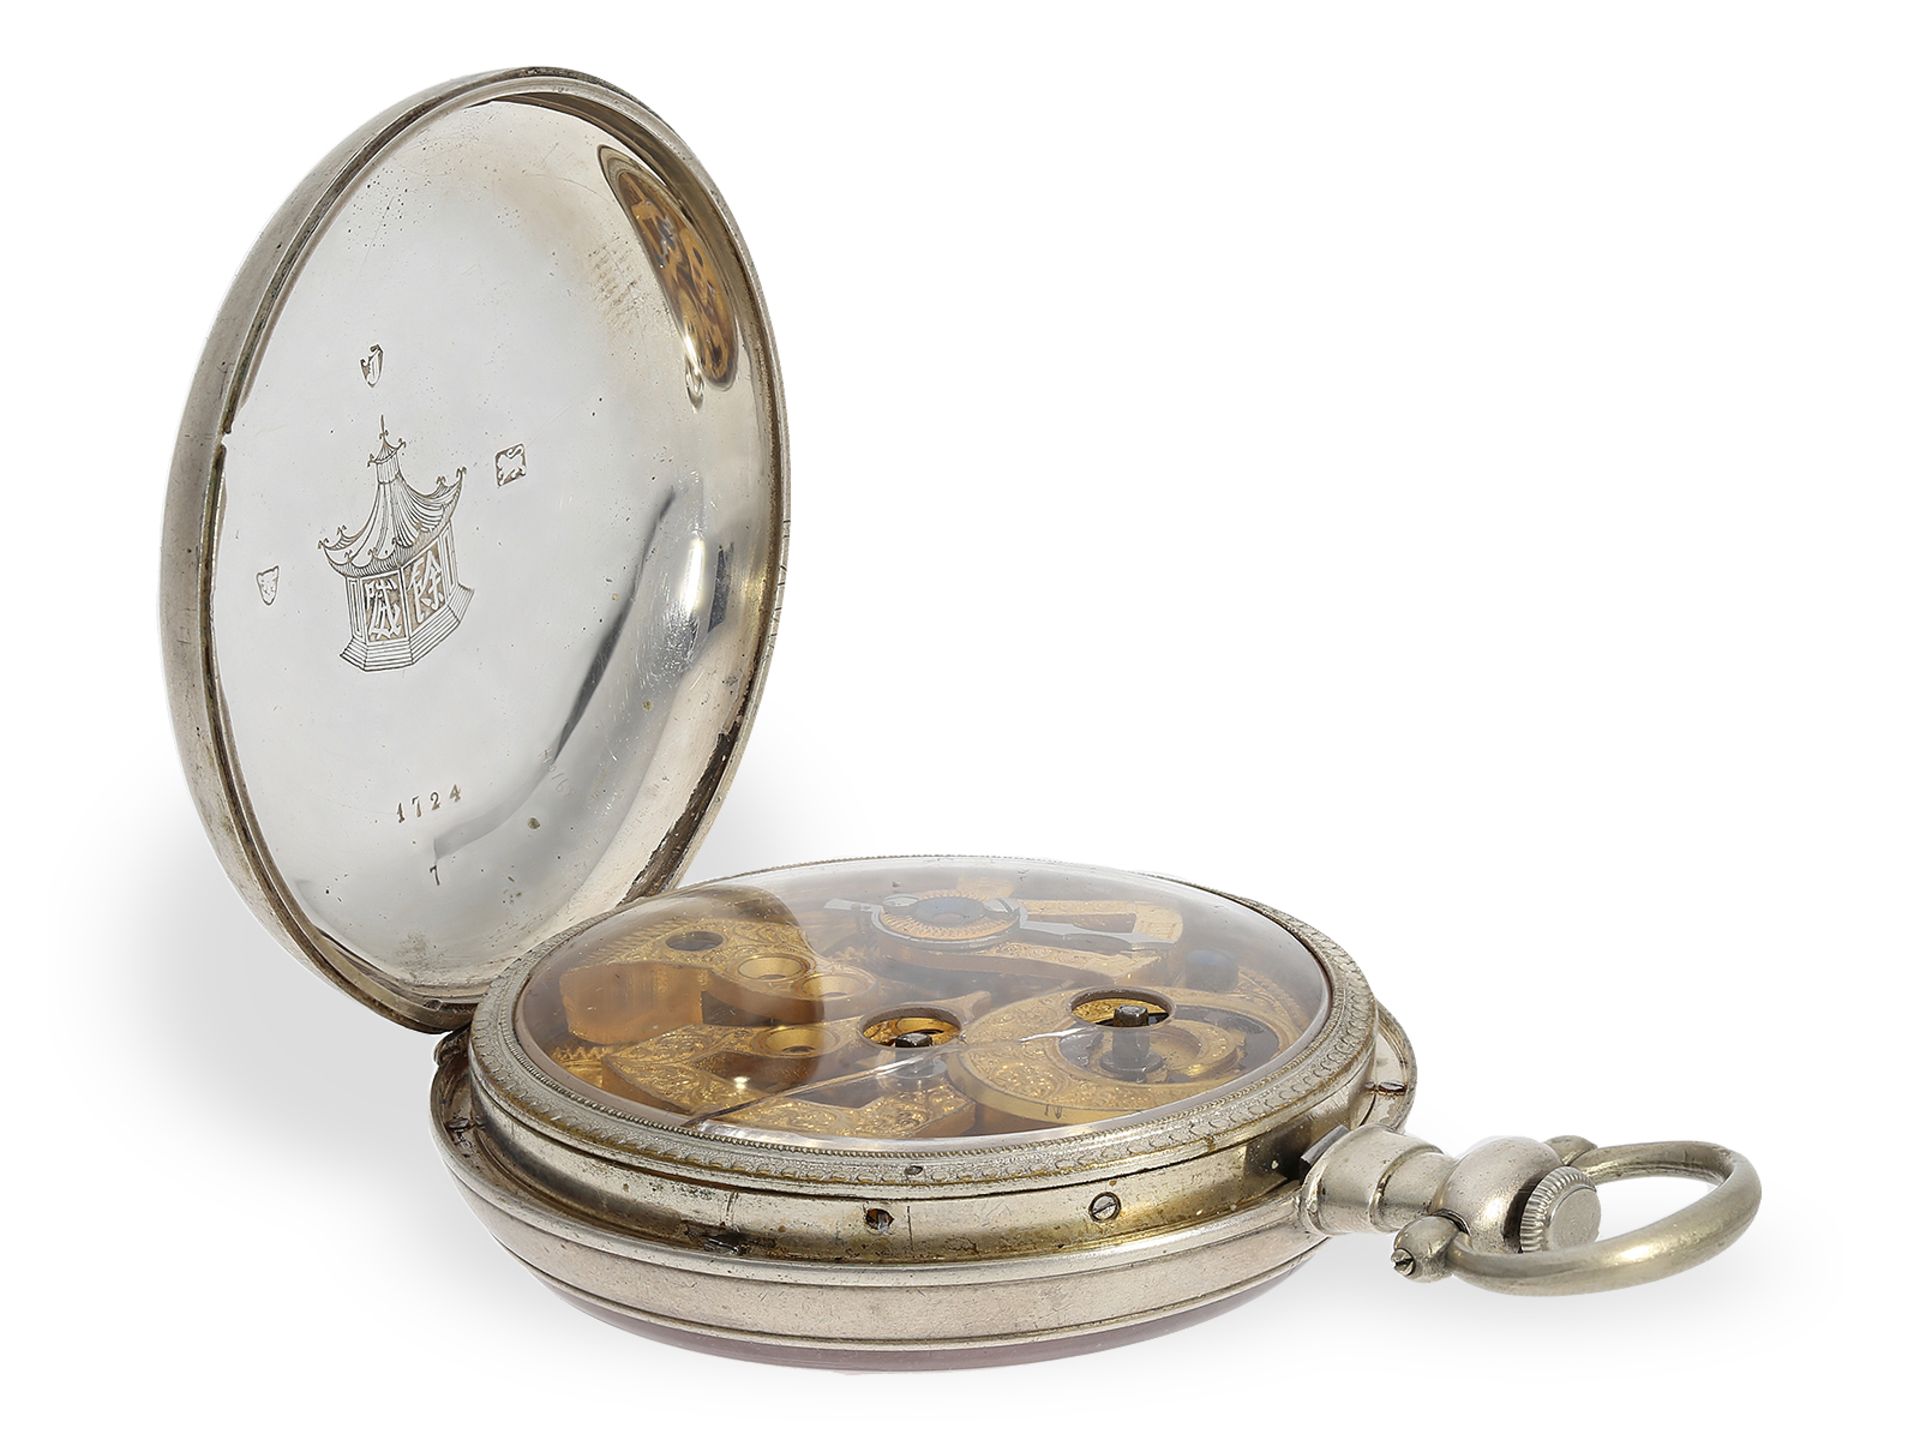 Pocket watch: fine Fleurier pocket watch with centre seconds, Bovet for the Chinese market, ca. 1850 - Image 3 of 5